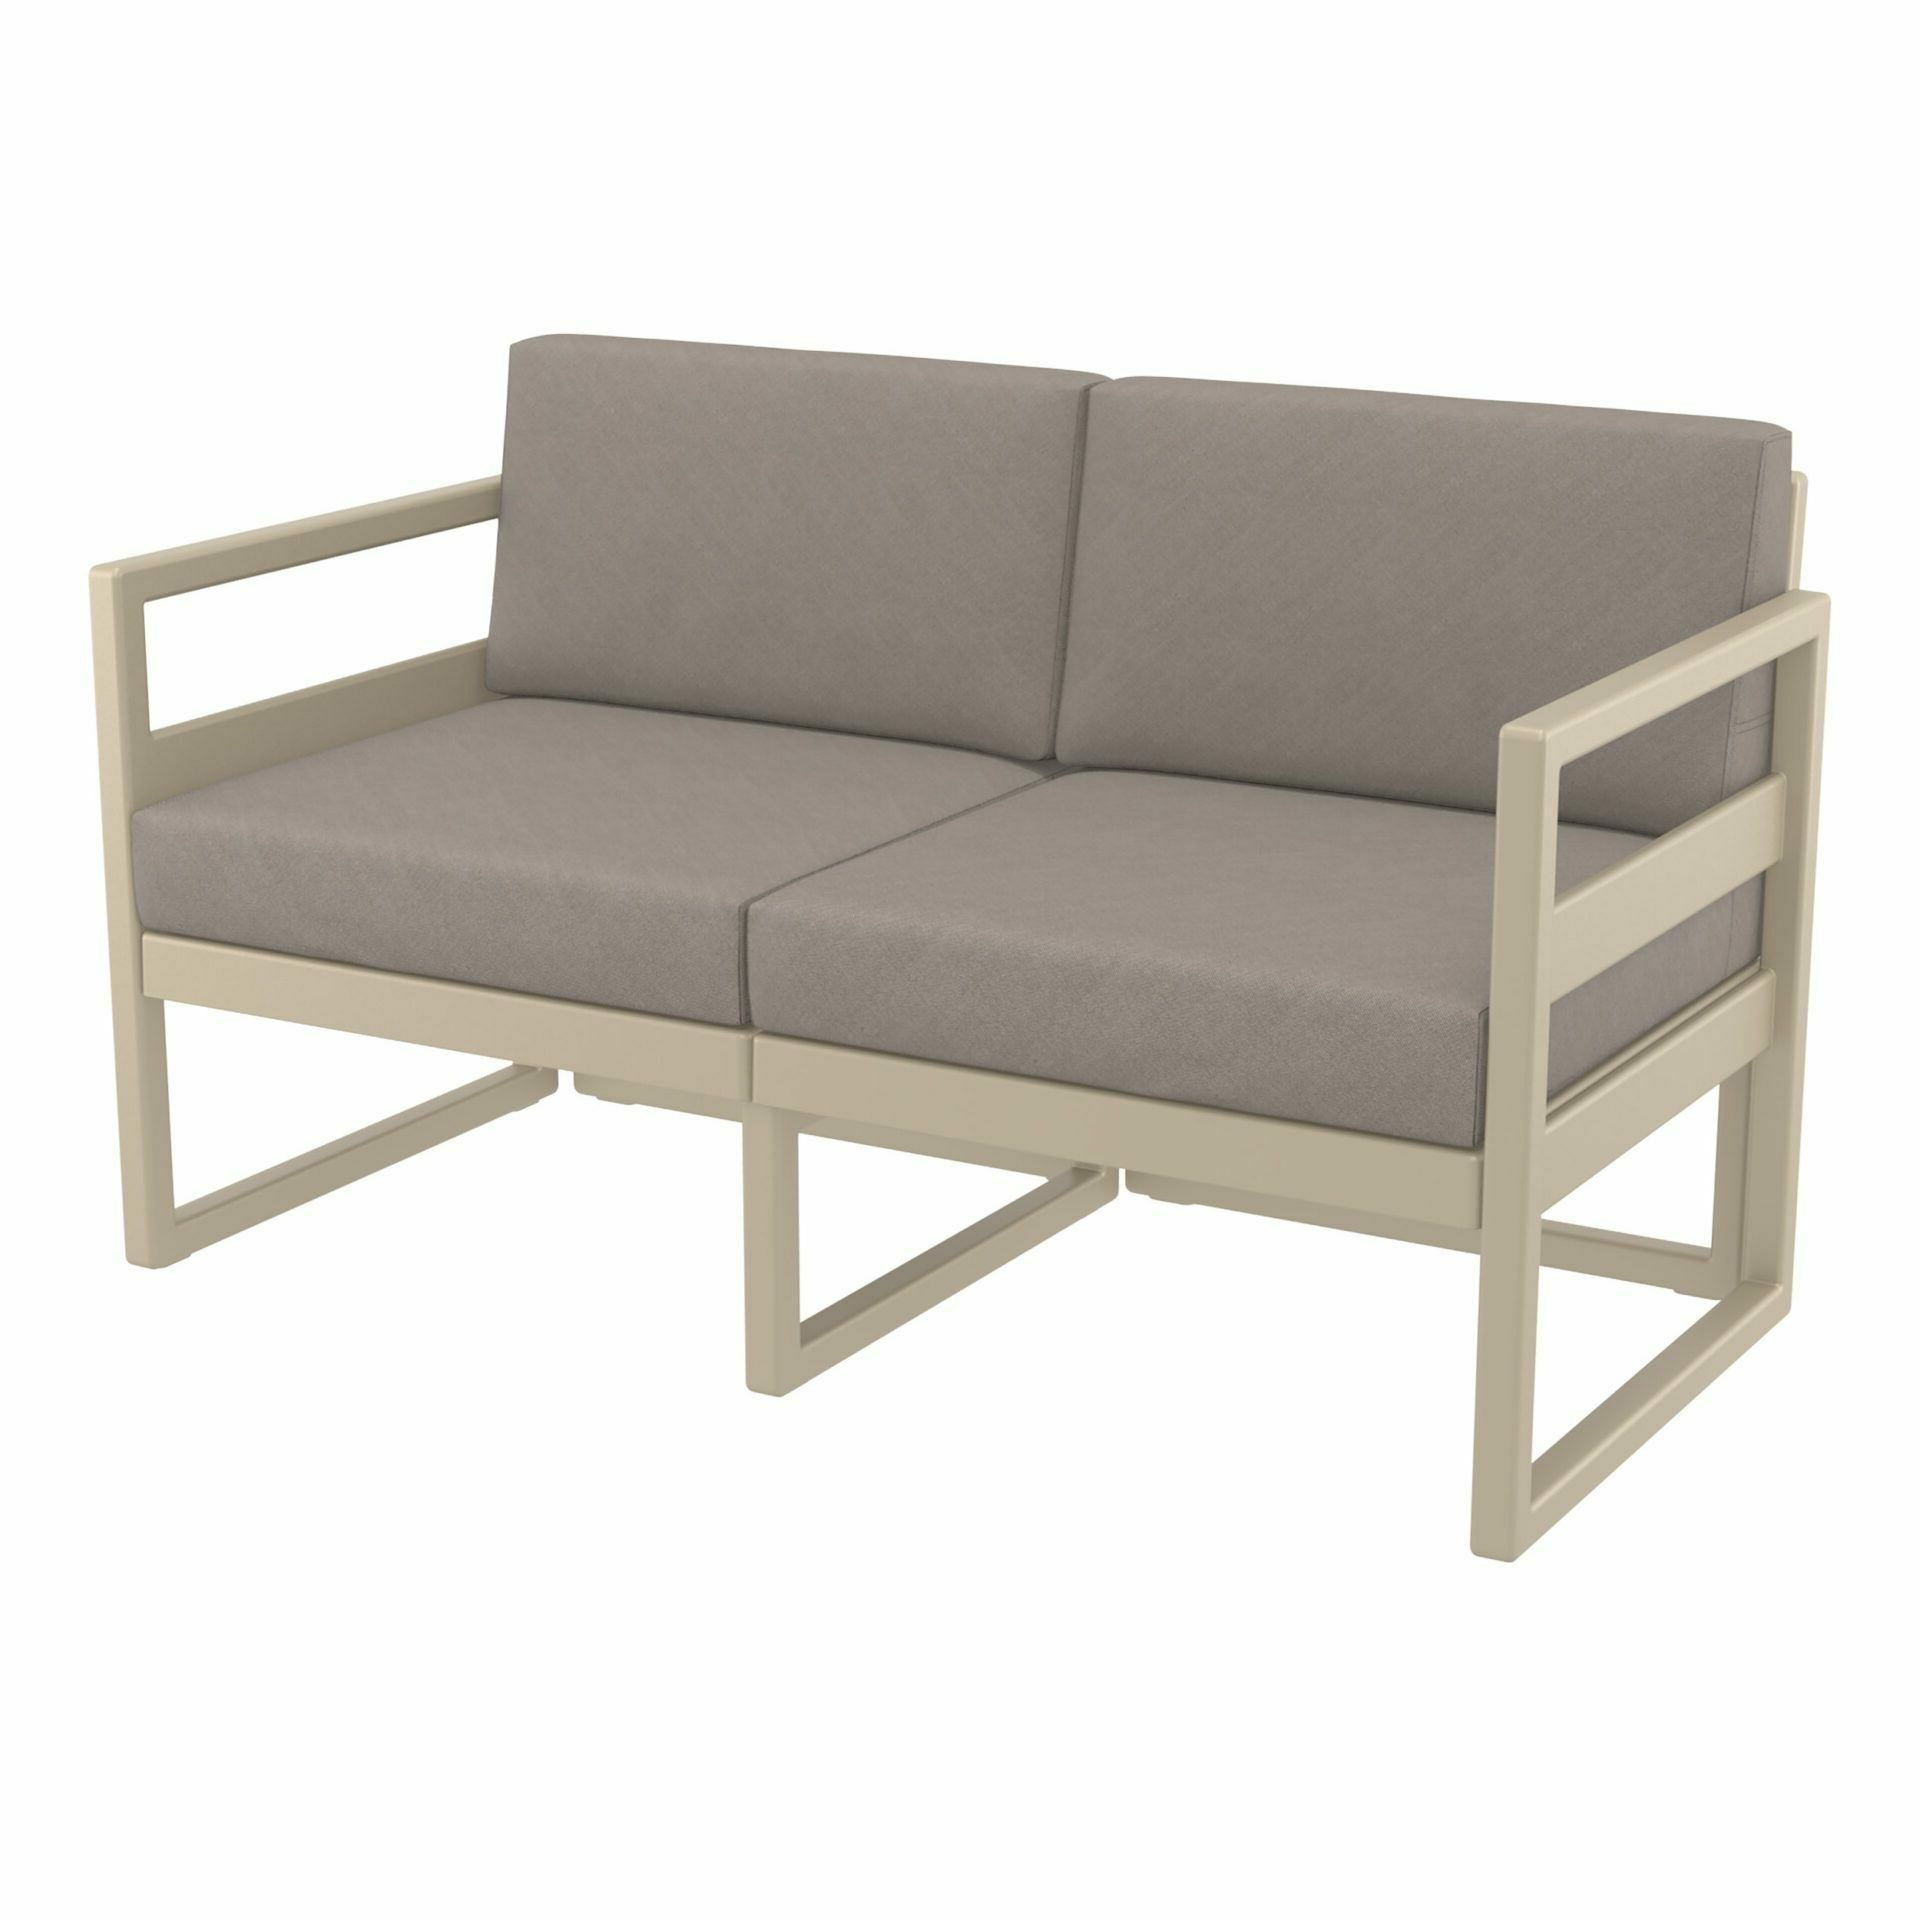 Mykonos Lounge Sofa - Taupe with Light Brown Cushions